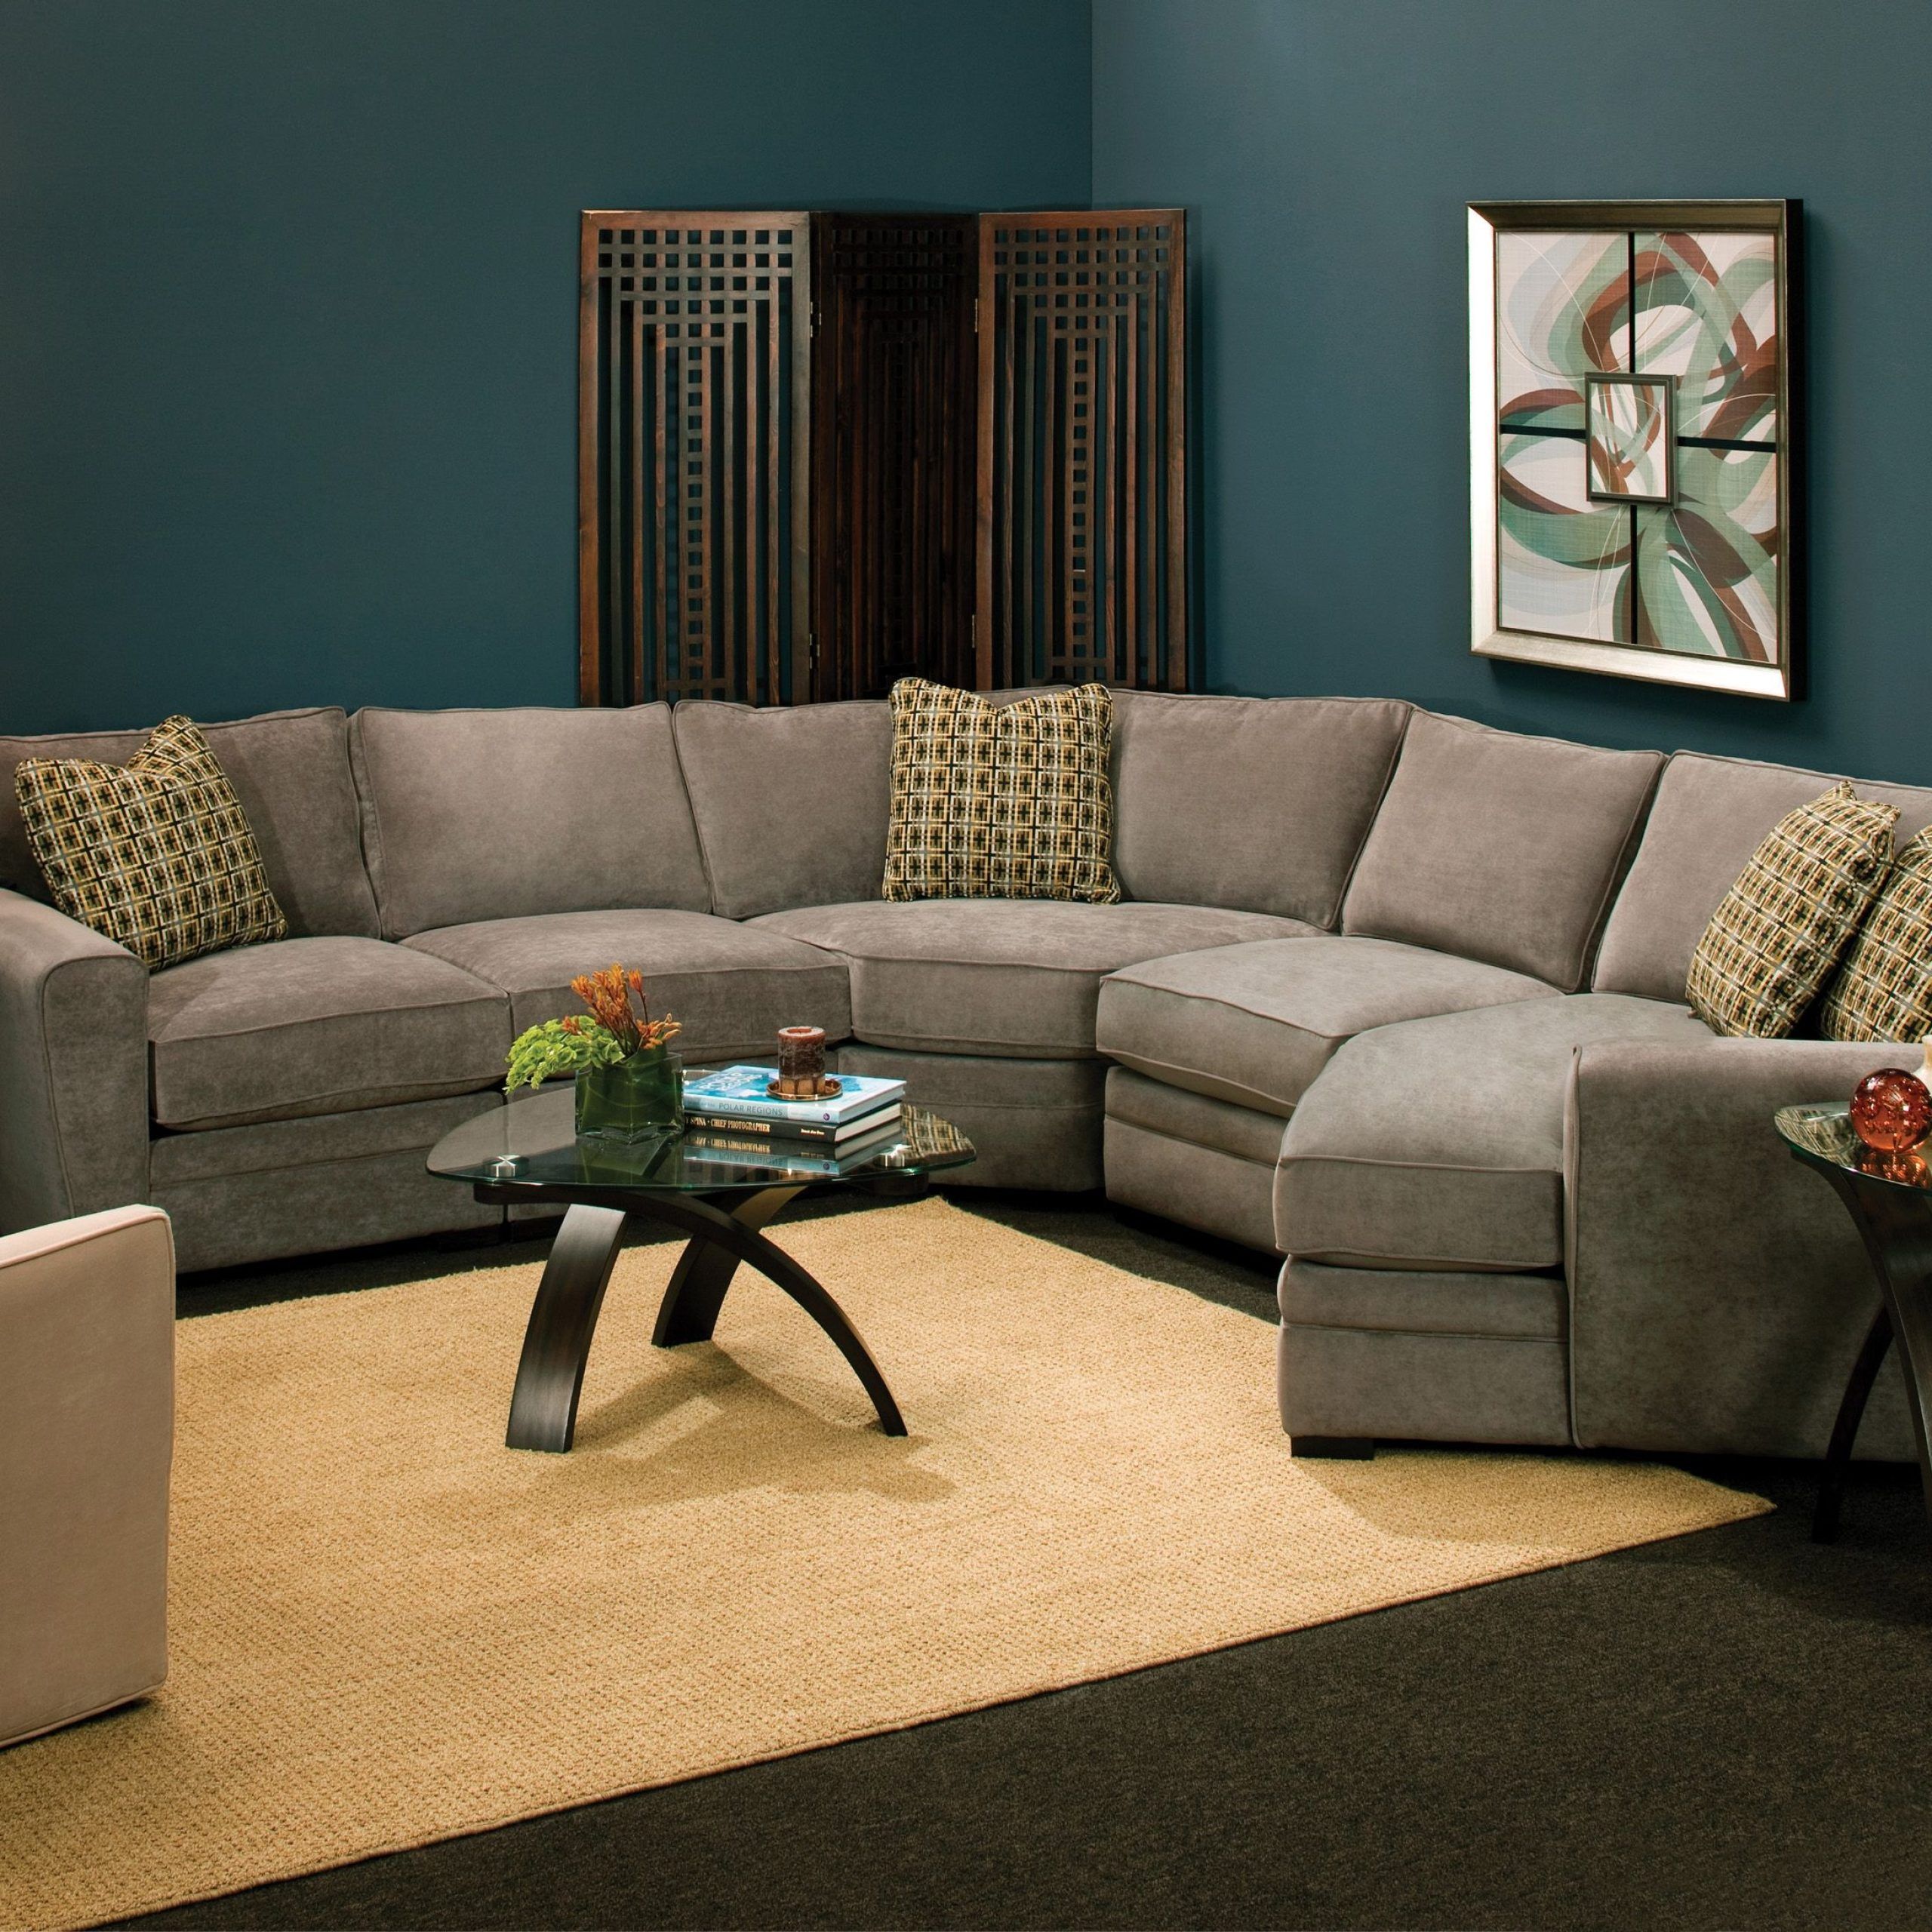 This Artemis Ii 4 Piece Microfiber Sectional Sofa Is So Easy To Inside Microfiber Sectional Corner Sofas (Gallery 13 of 20)